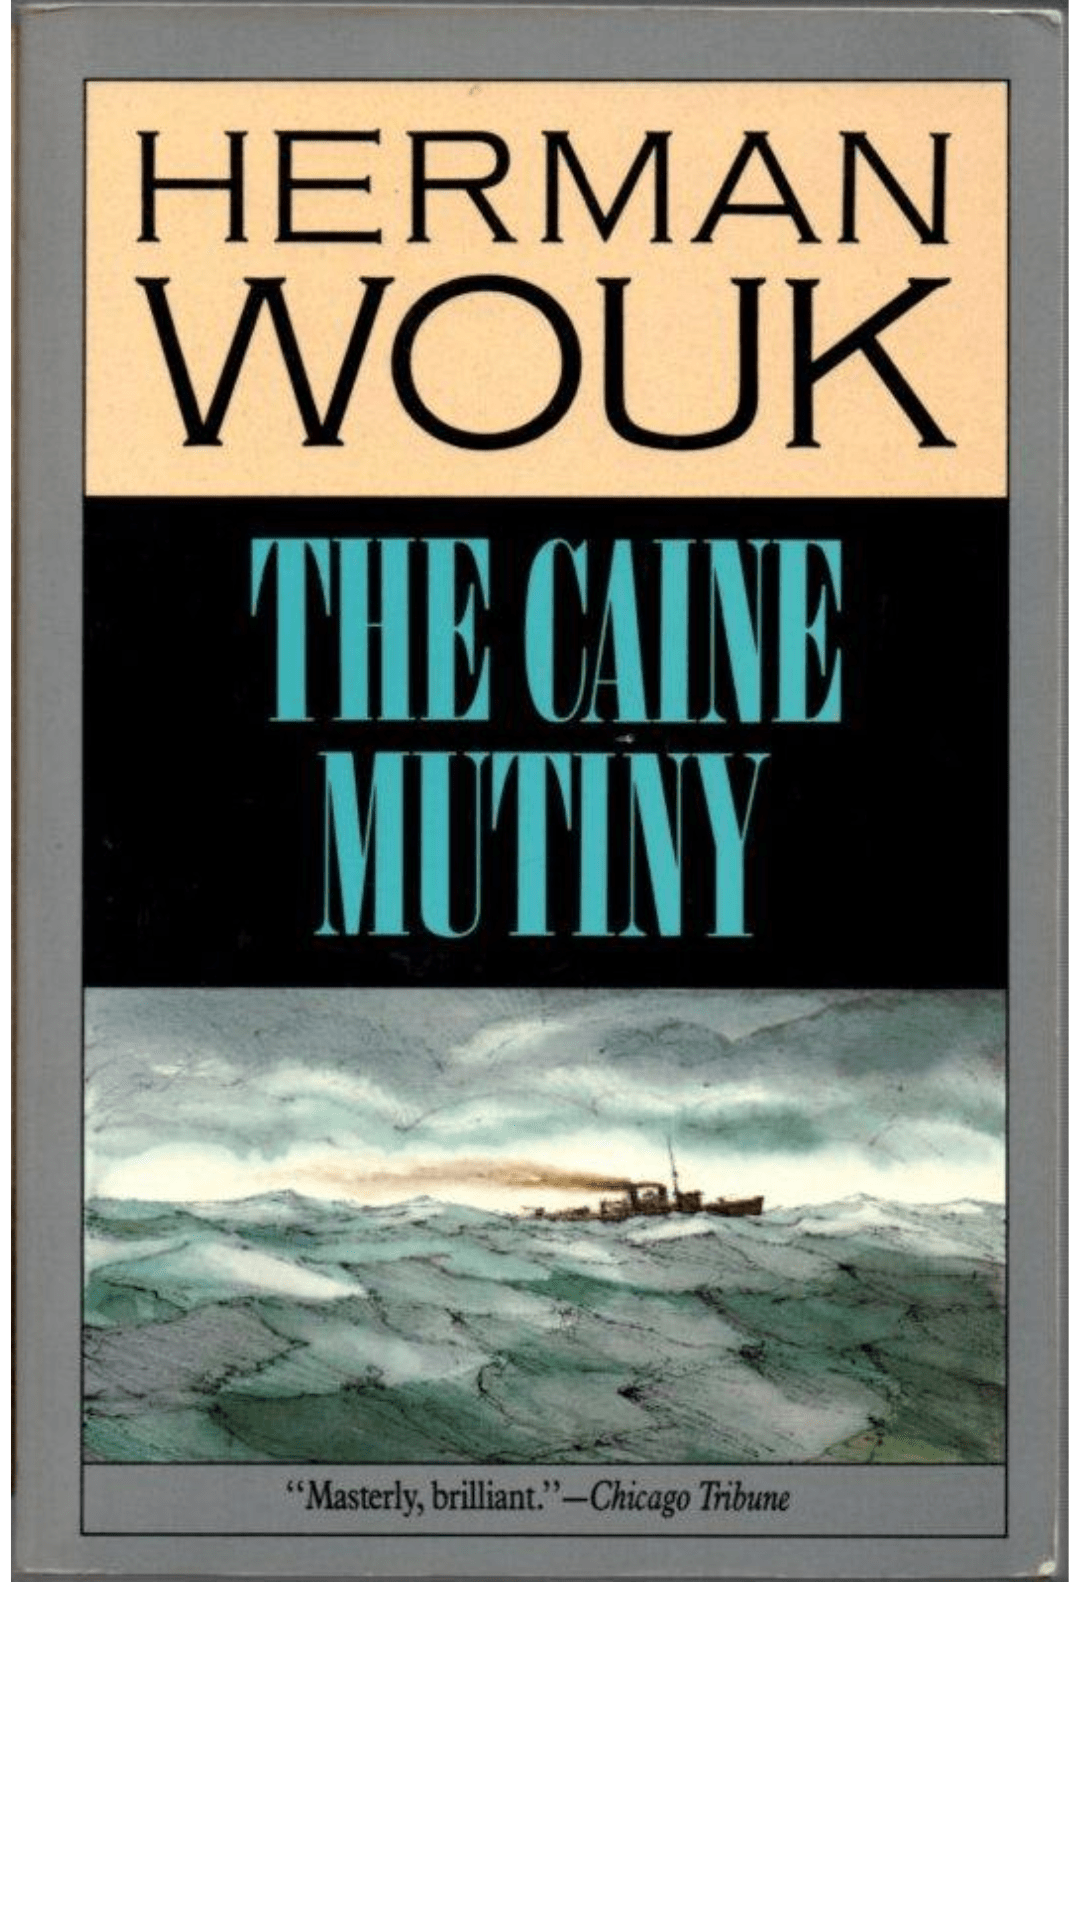 The Caine Mutiny by Herman Wouk